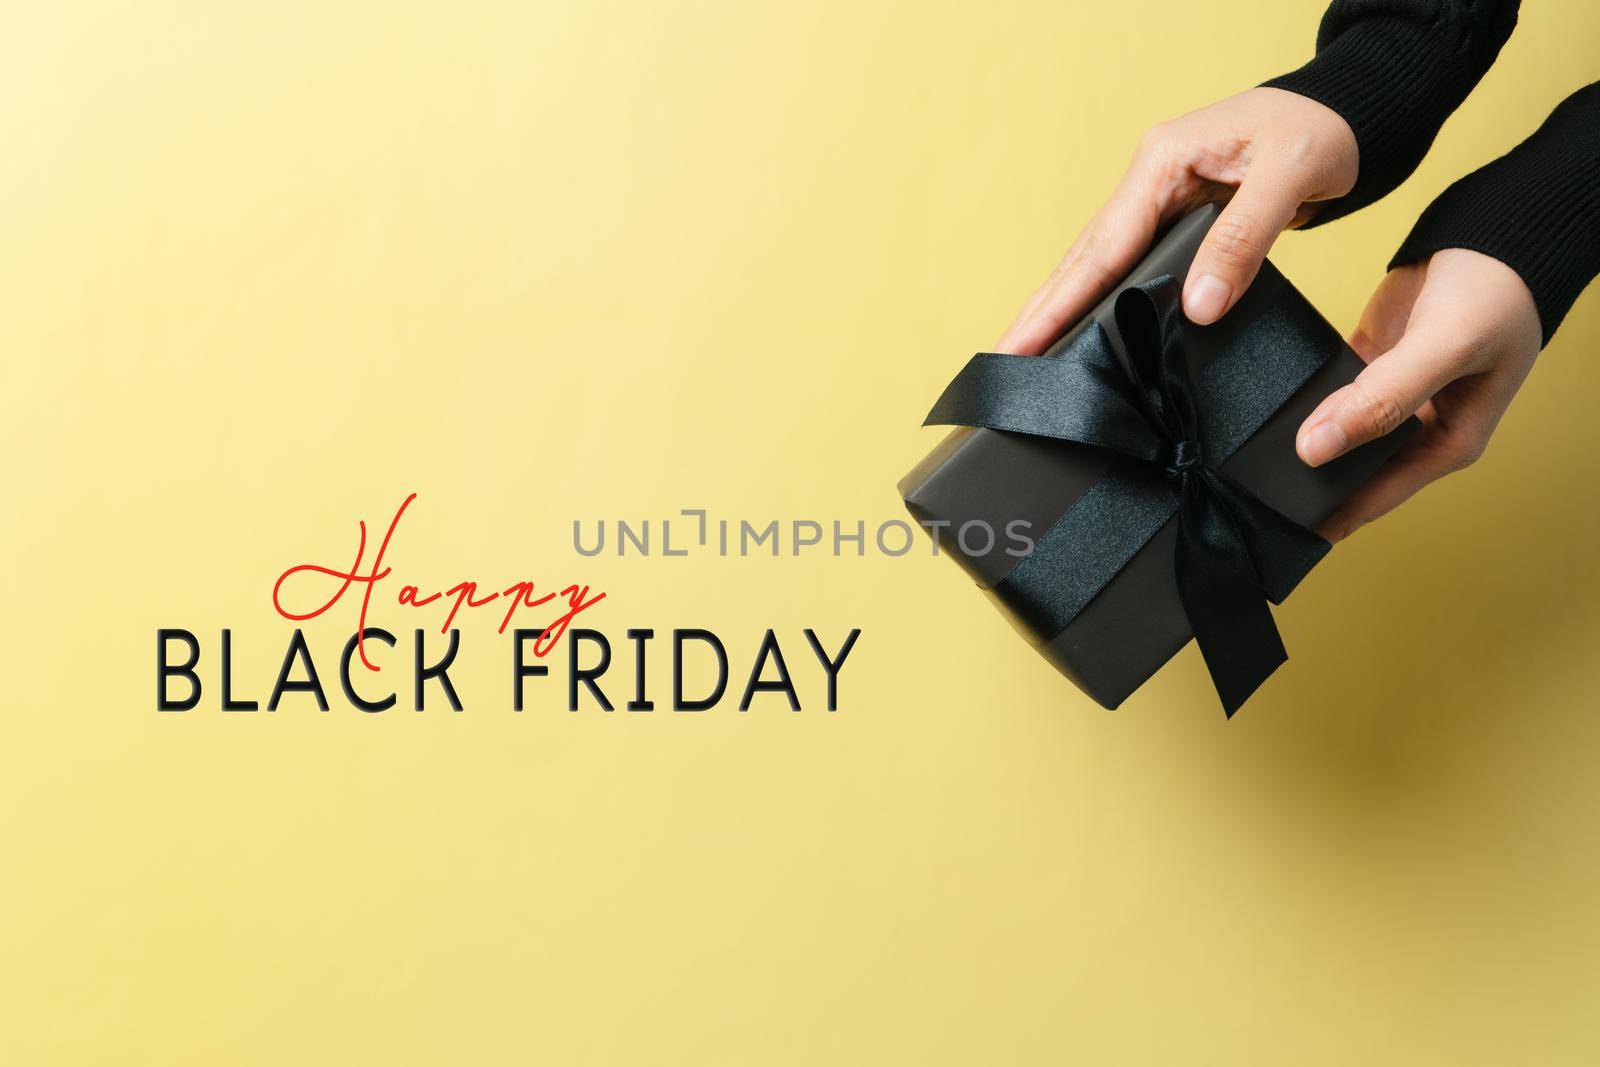 black friday sale, woman hand give the gift box on yellow background